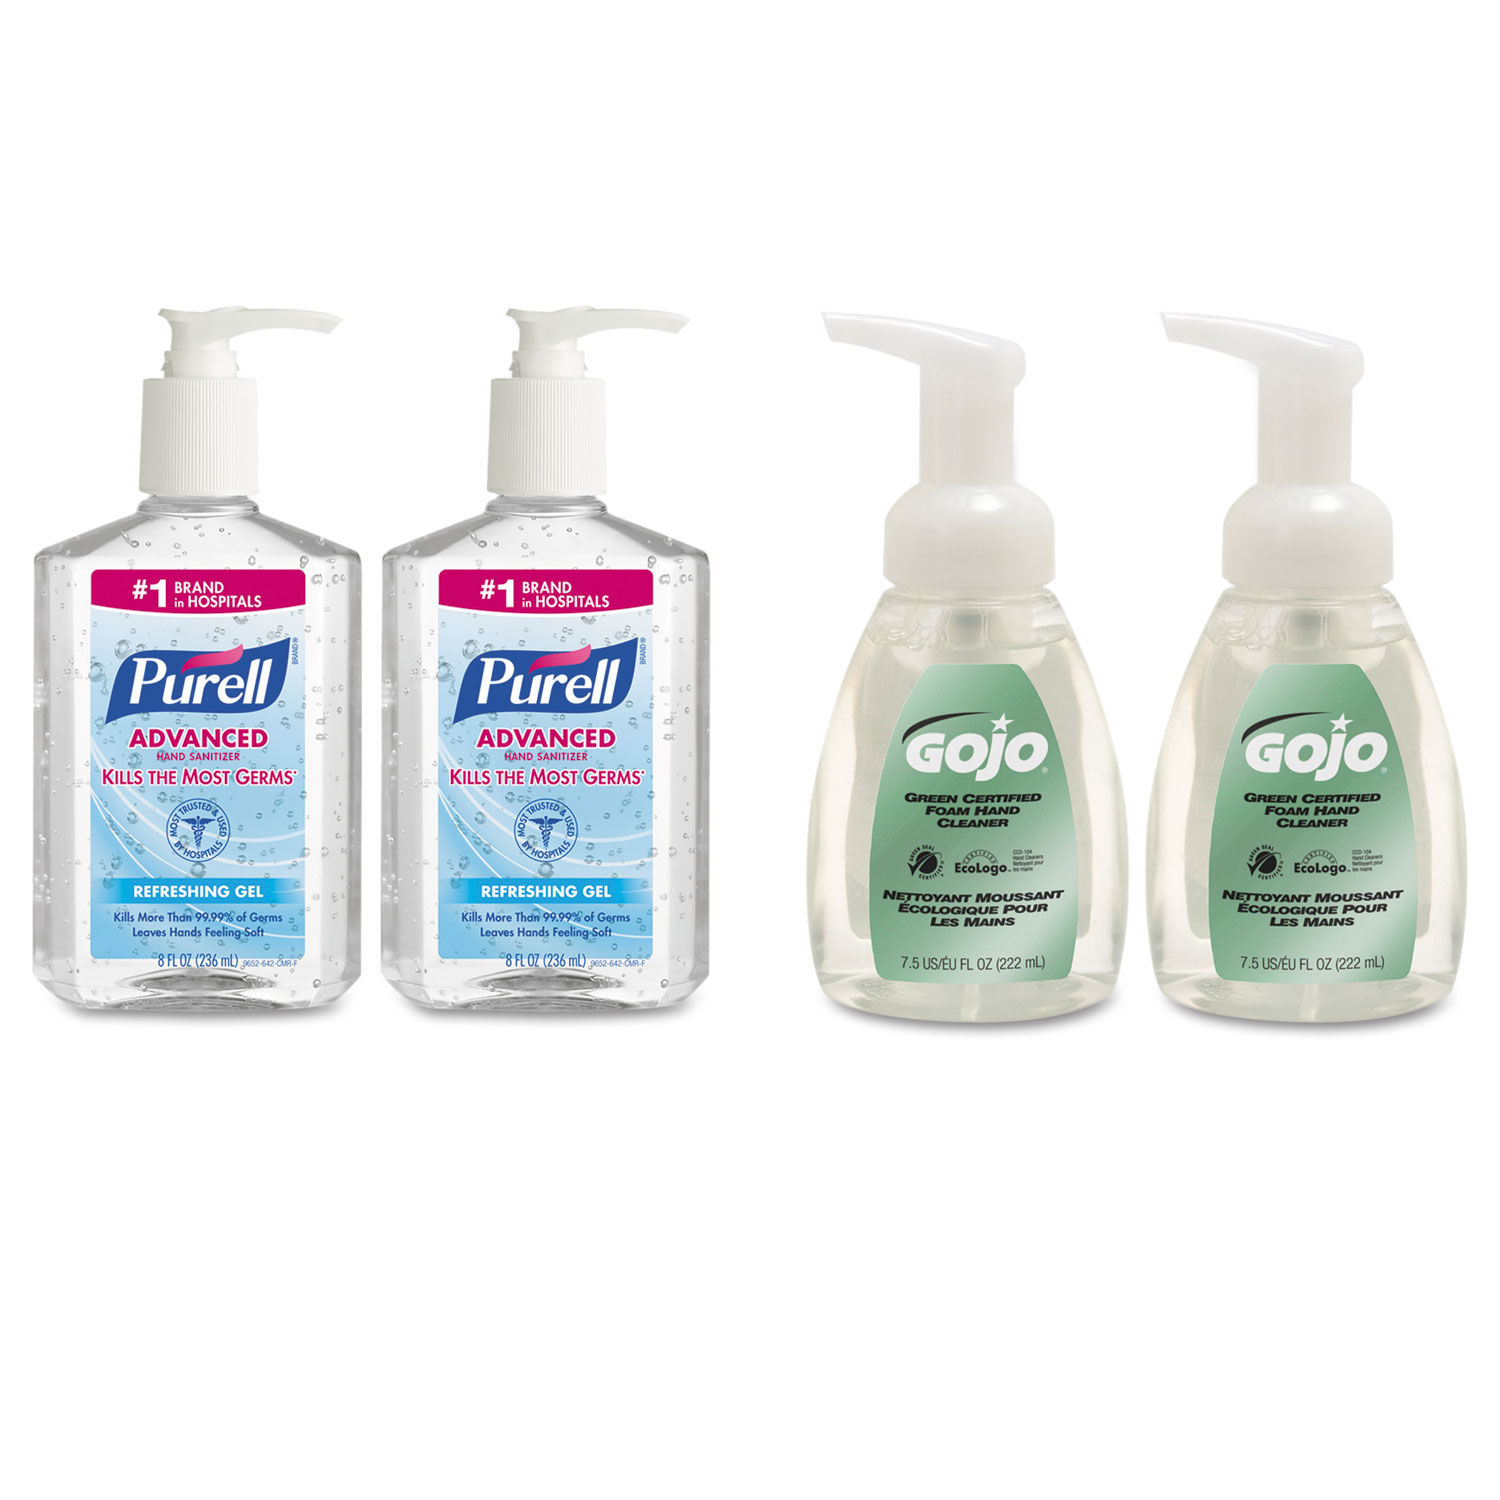 Advanced Hand Sanitizer/Hand Soap Kit by PURELL ...